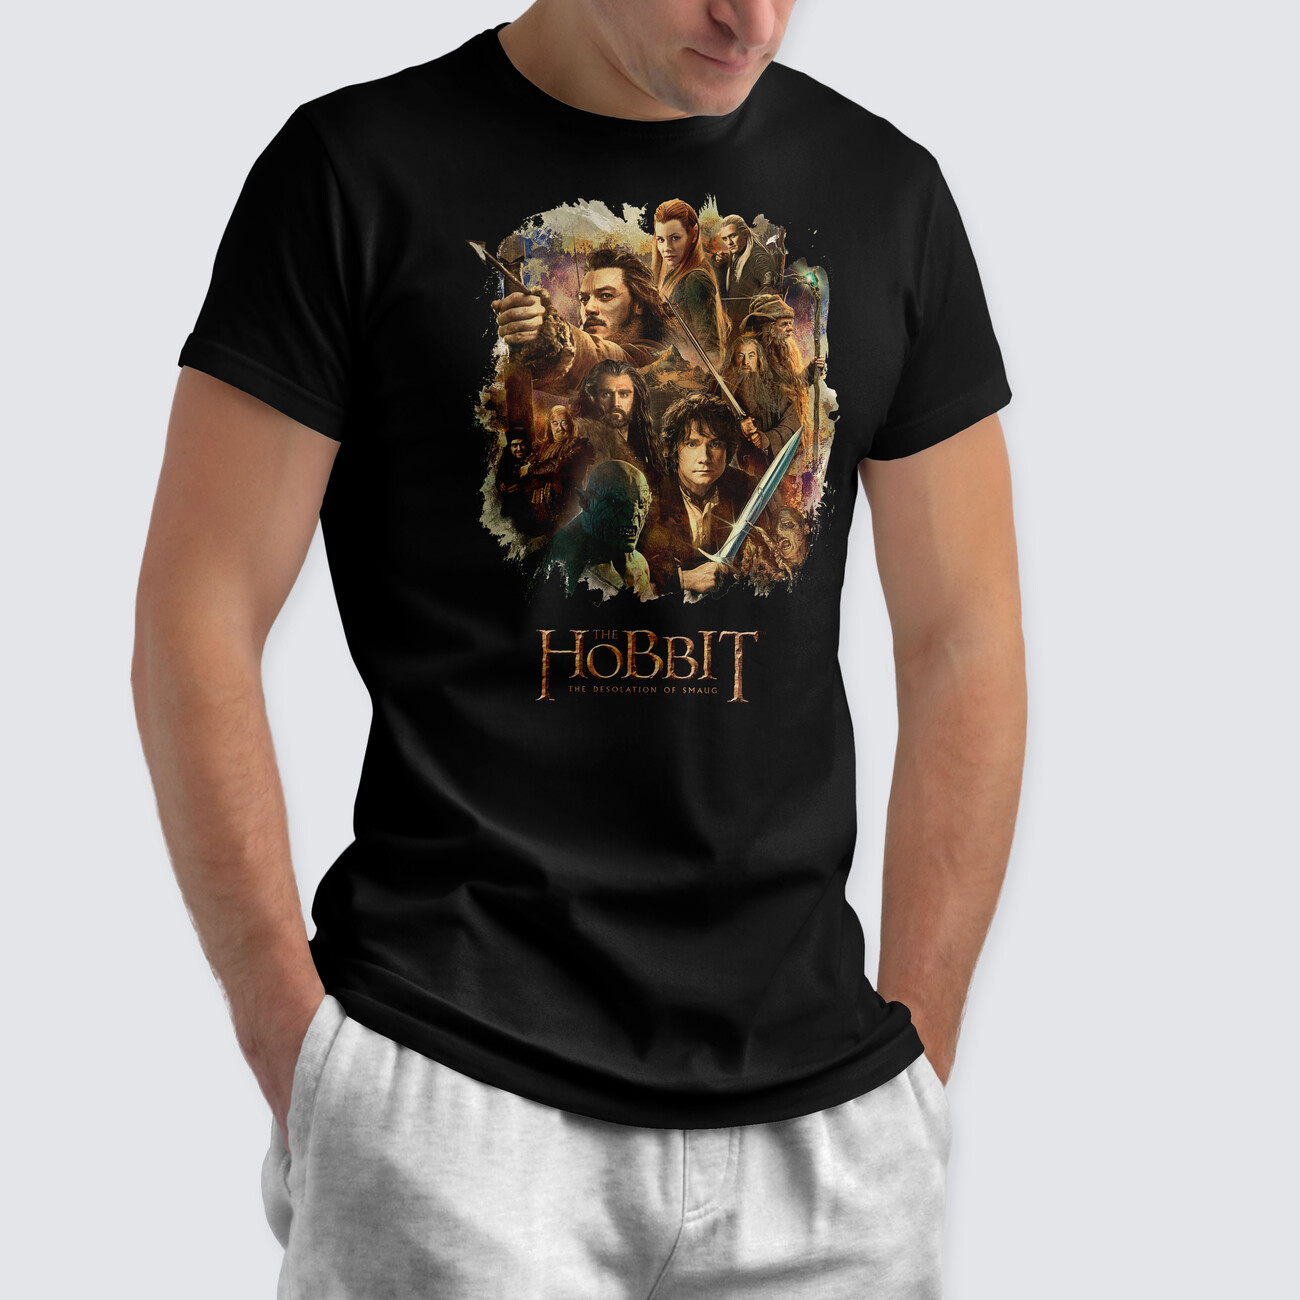 Hobbit: The Desolation of Smaug accessories Clothes merchandise | Characters - for fans and